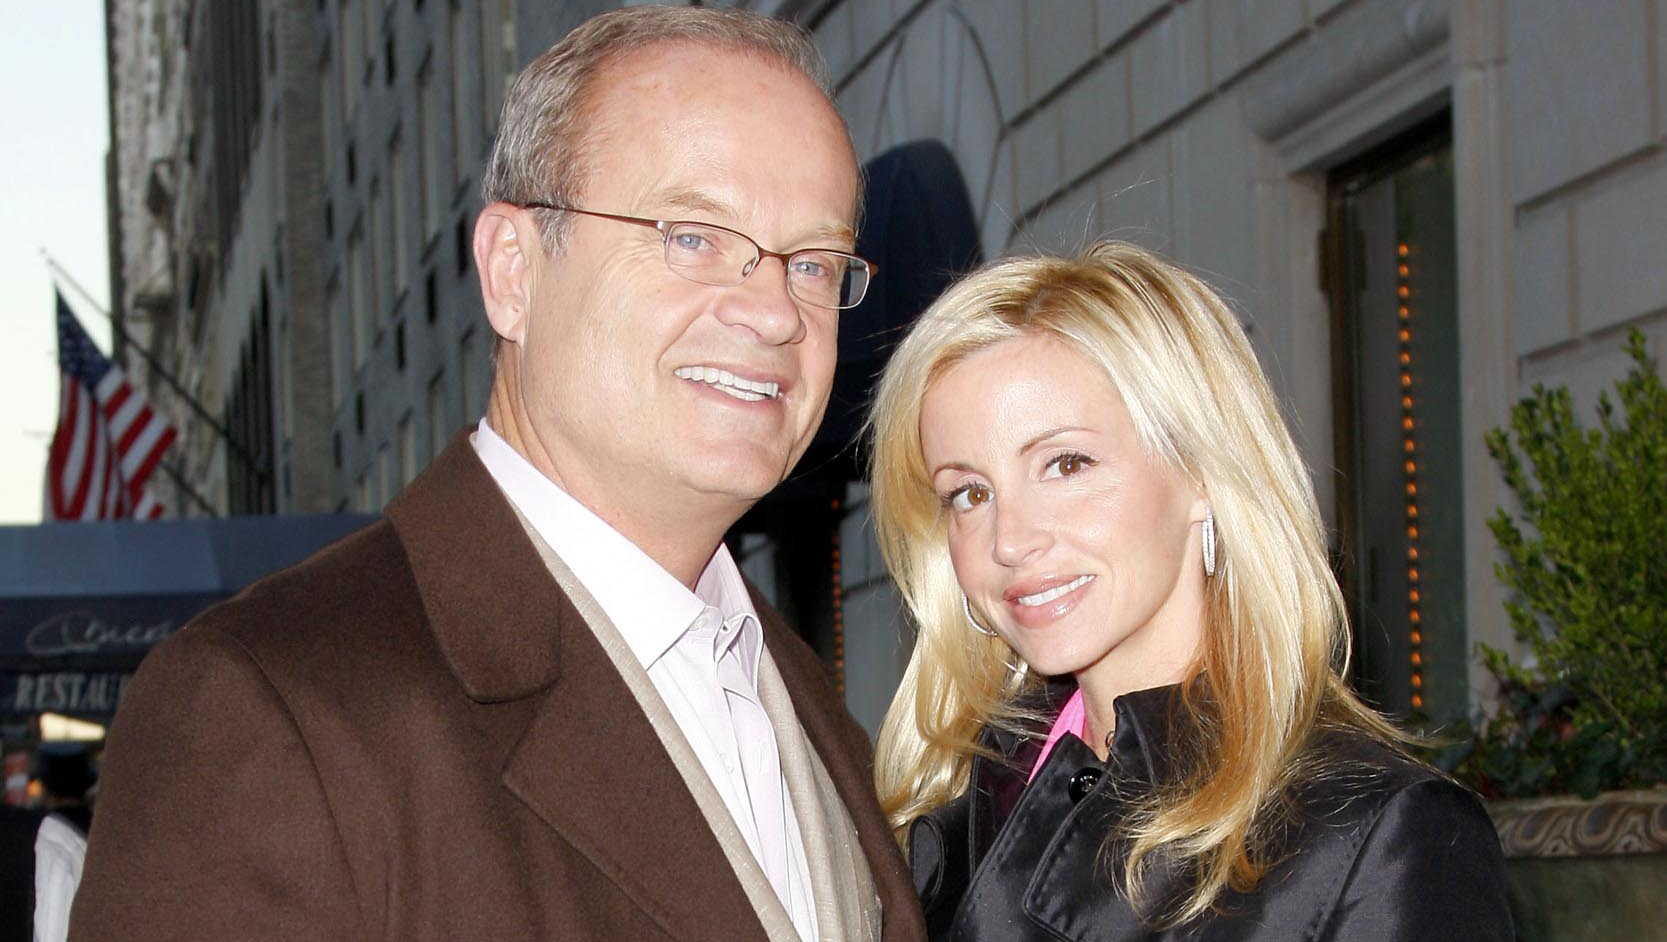 Kelsey Grammer Calls Ex-Wife Camille ‘Pathetic,’ Claims She Threatened Divorce During Mom’s Funeral